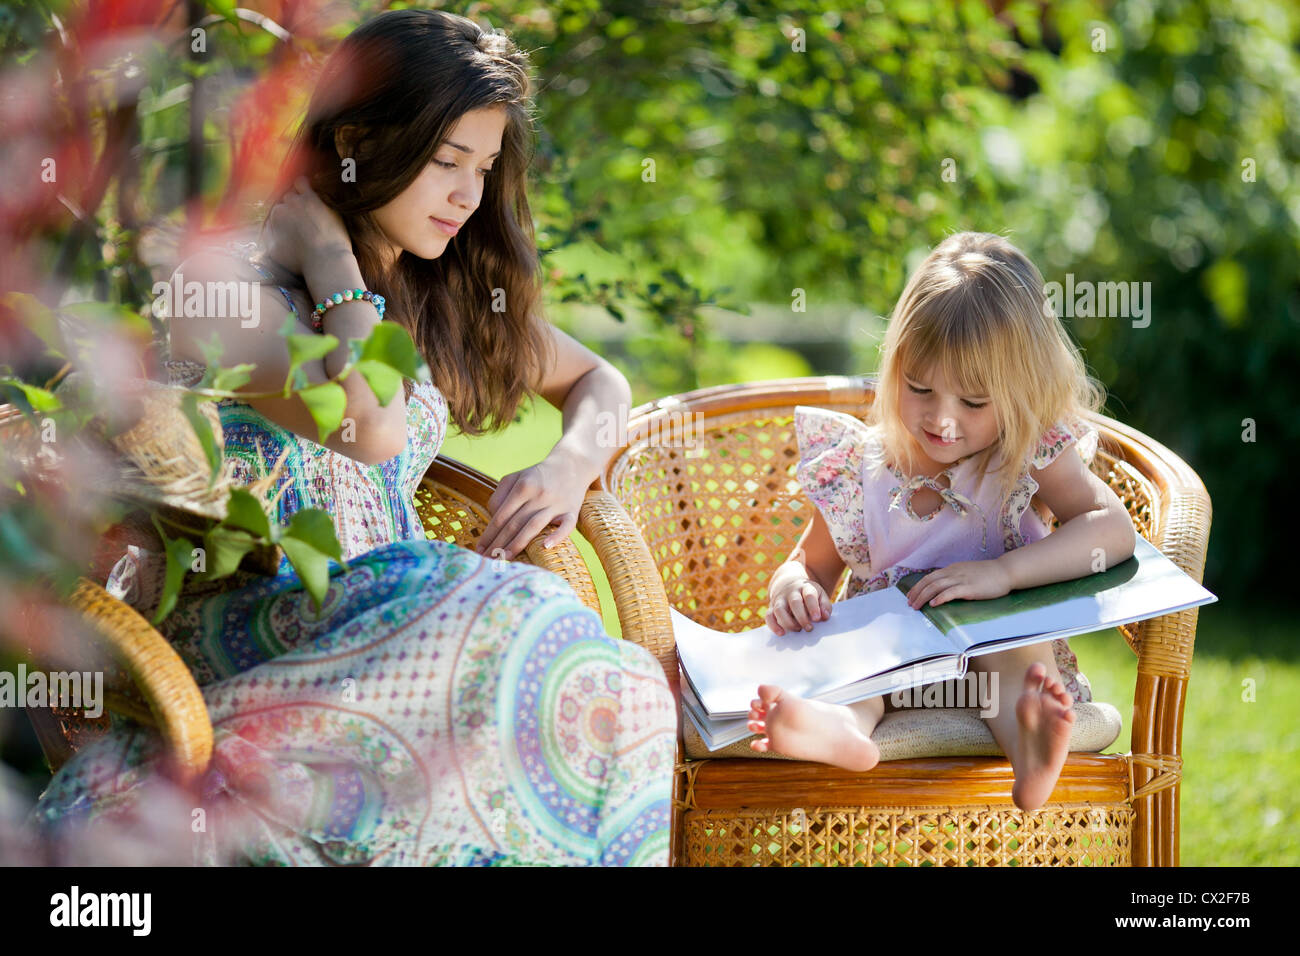 Girls reading book sitting in wicker chairs outdoor in summer day Stock Photo